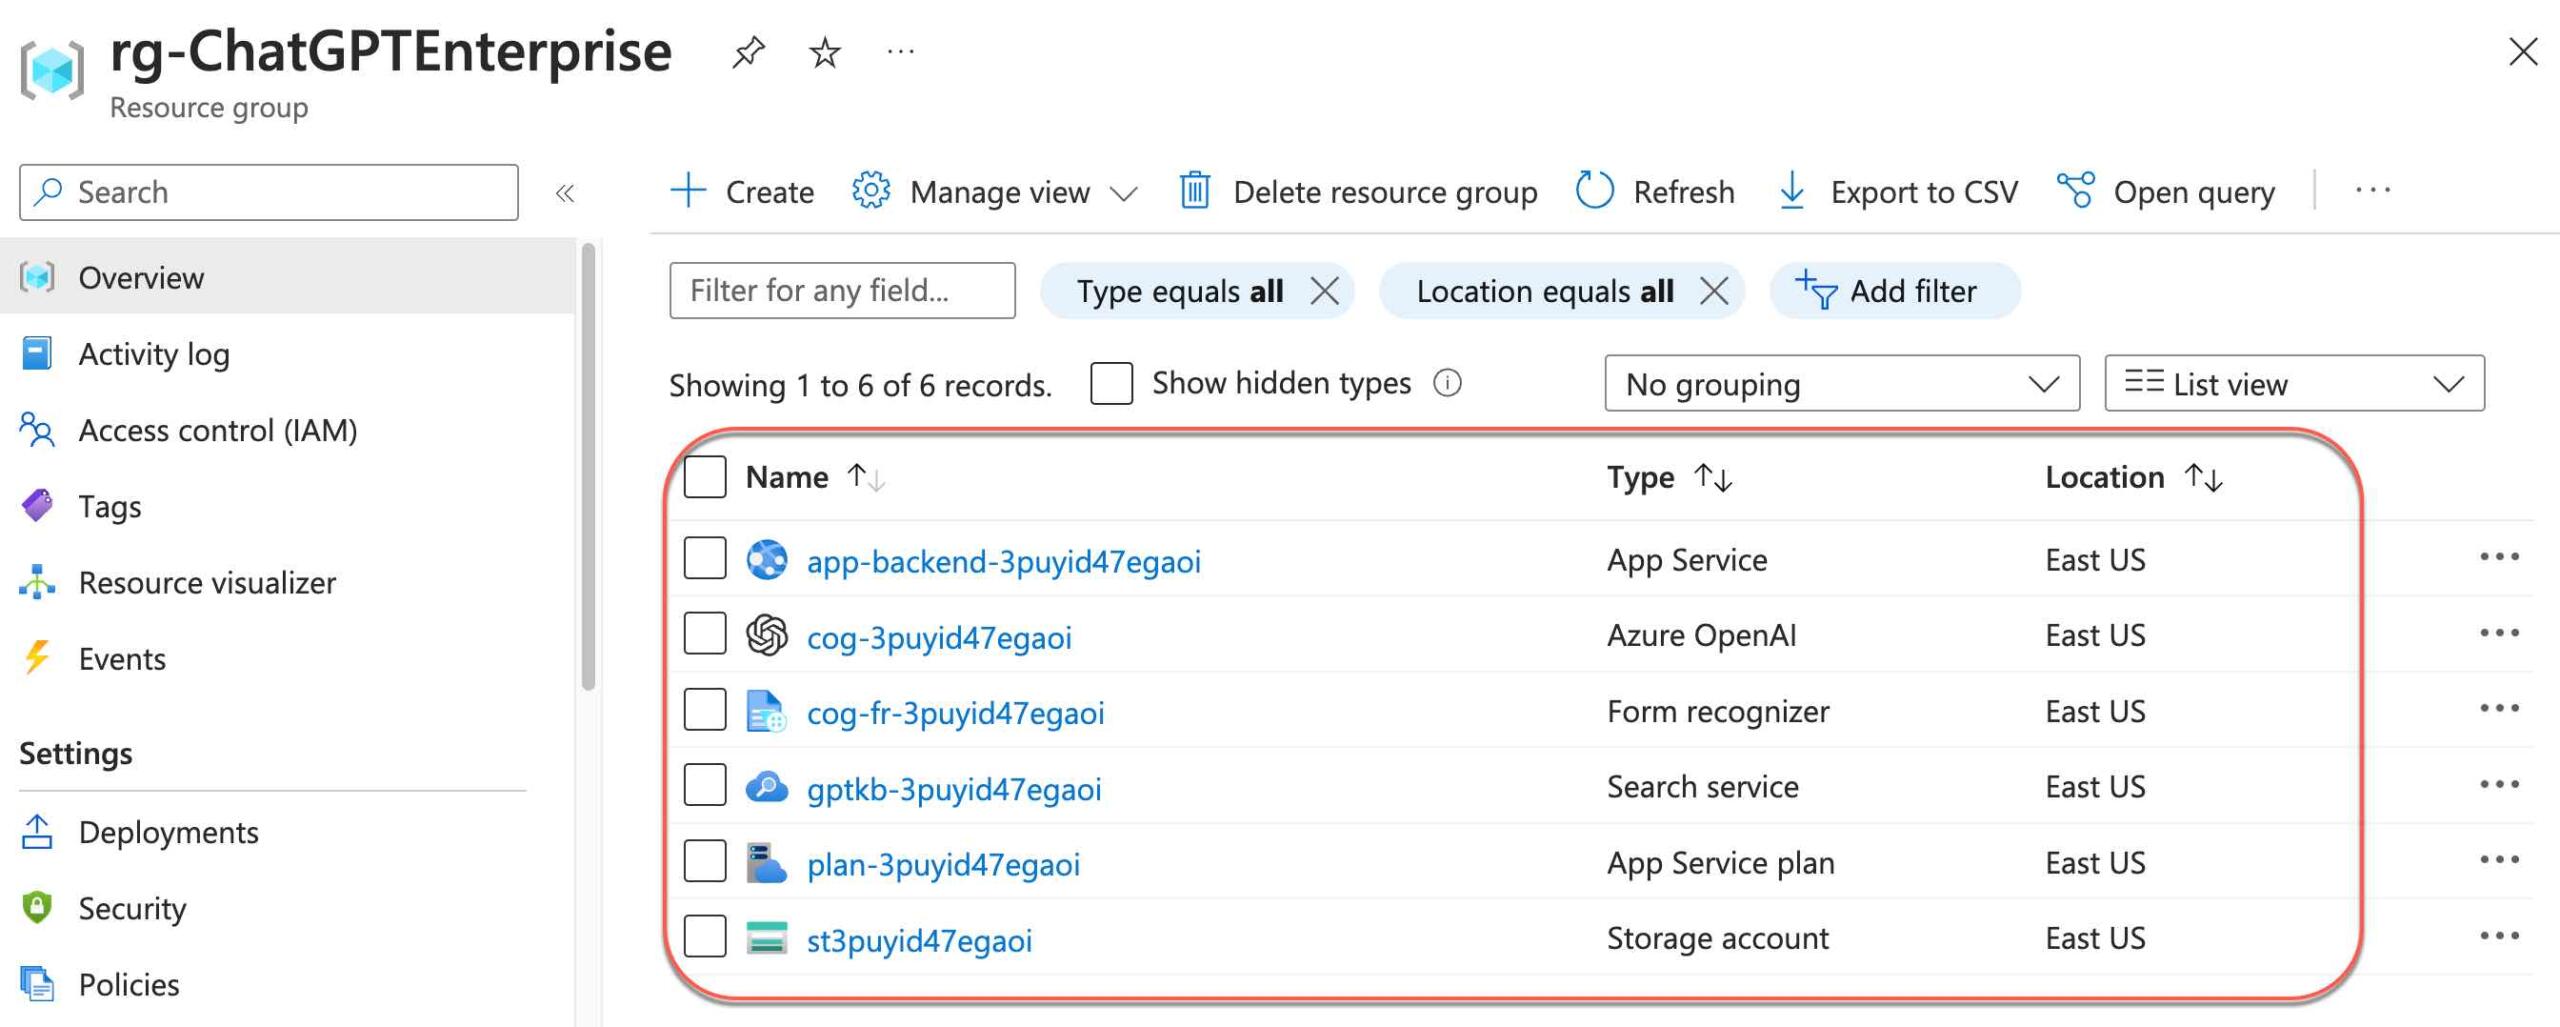 How to Build Your Own ChatGPT Using Enterprise Data